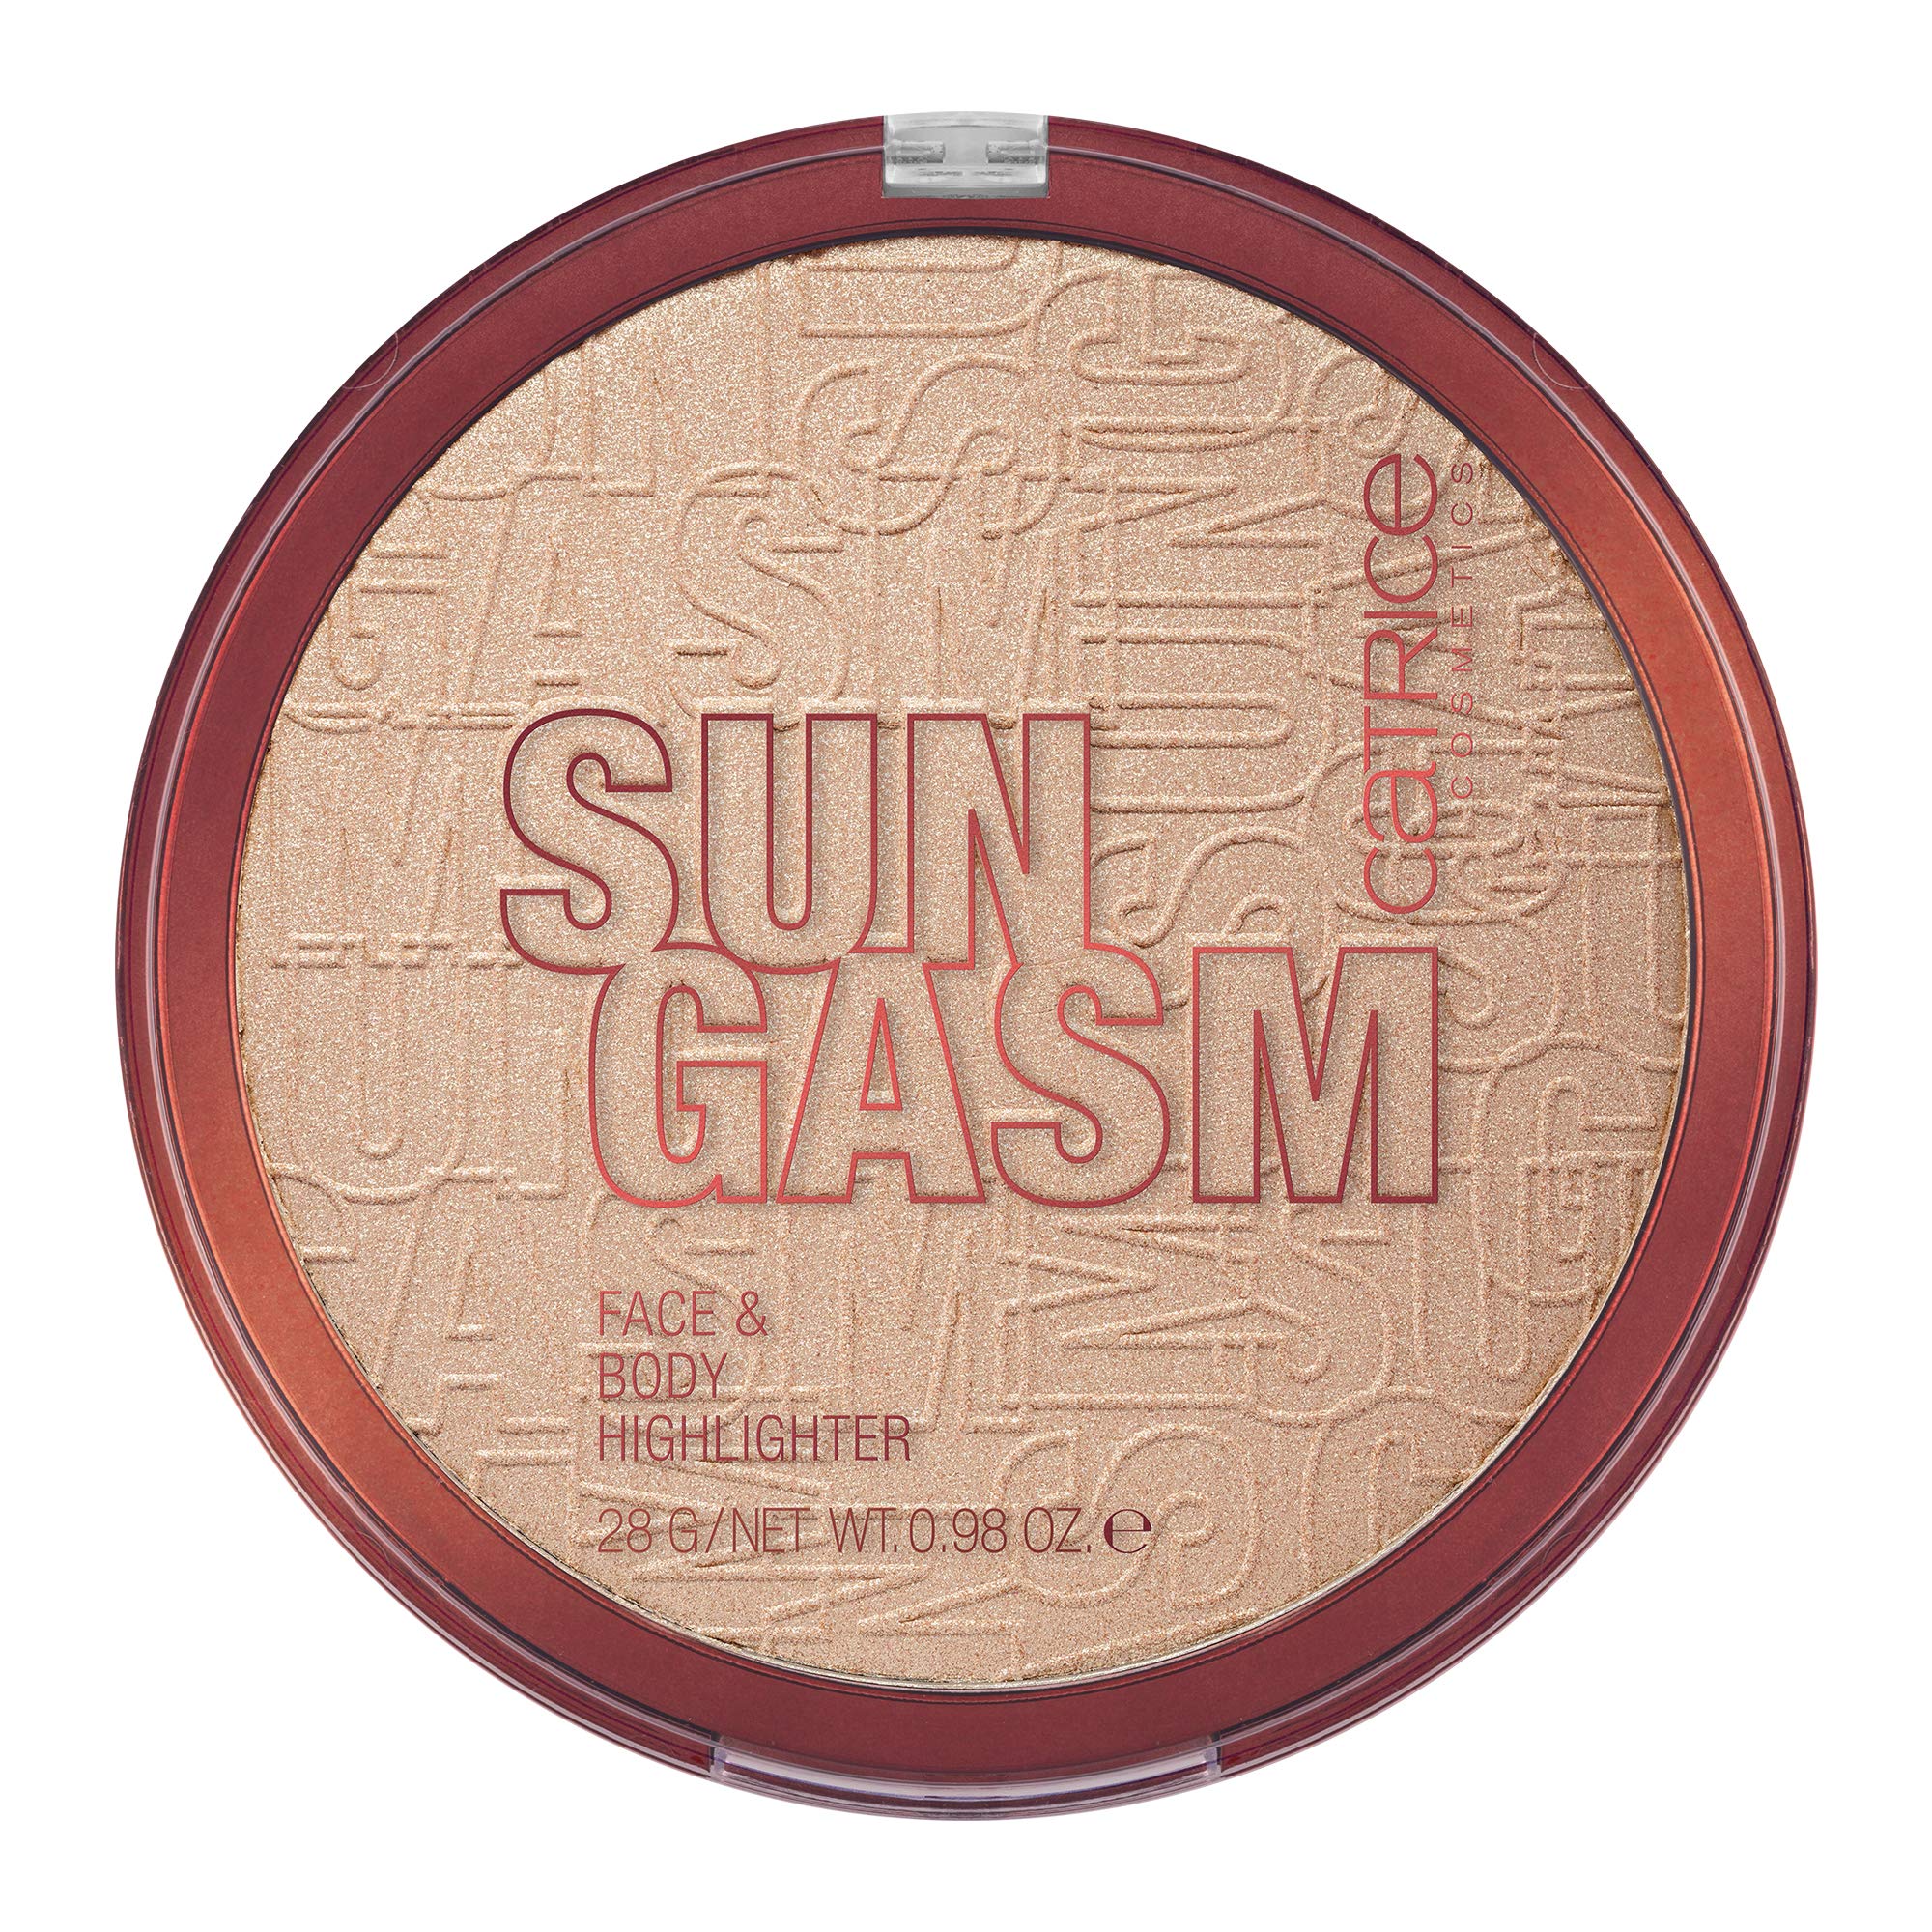 SUNGASM Catrice | Highlighter & Reflecting Powder Silky Soft | Jumbo Body Light Sized, Face With